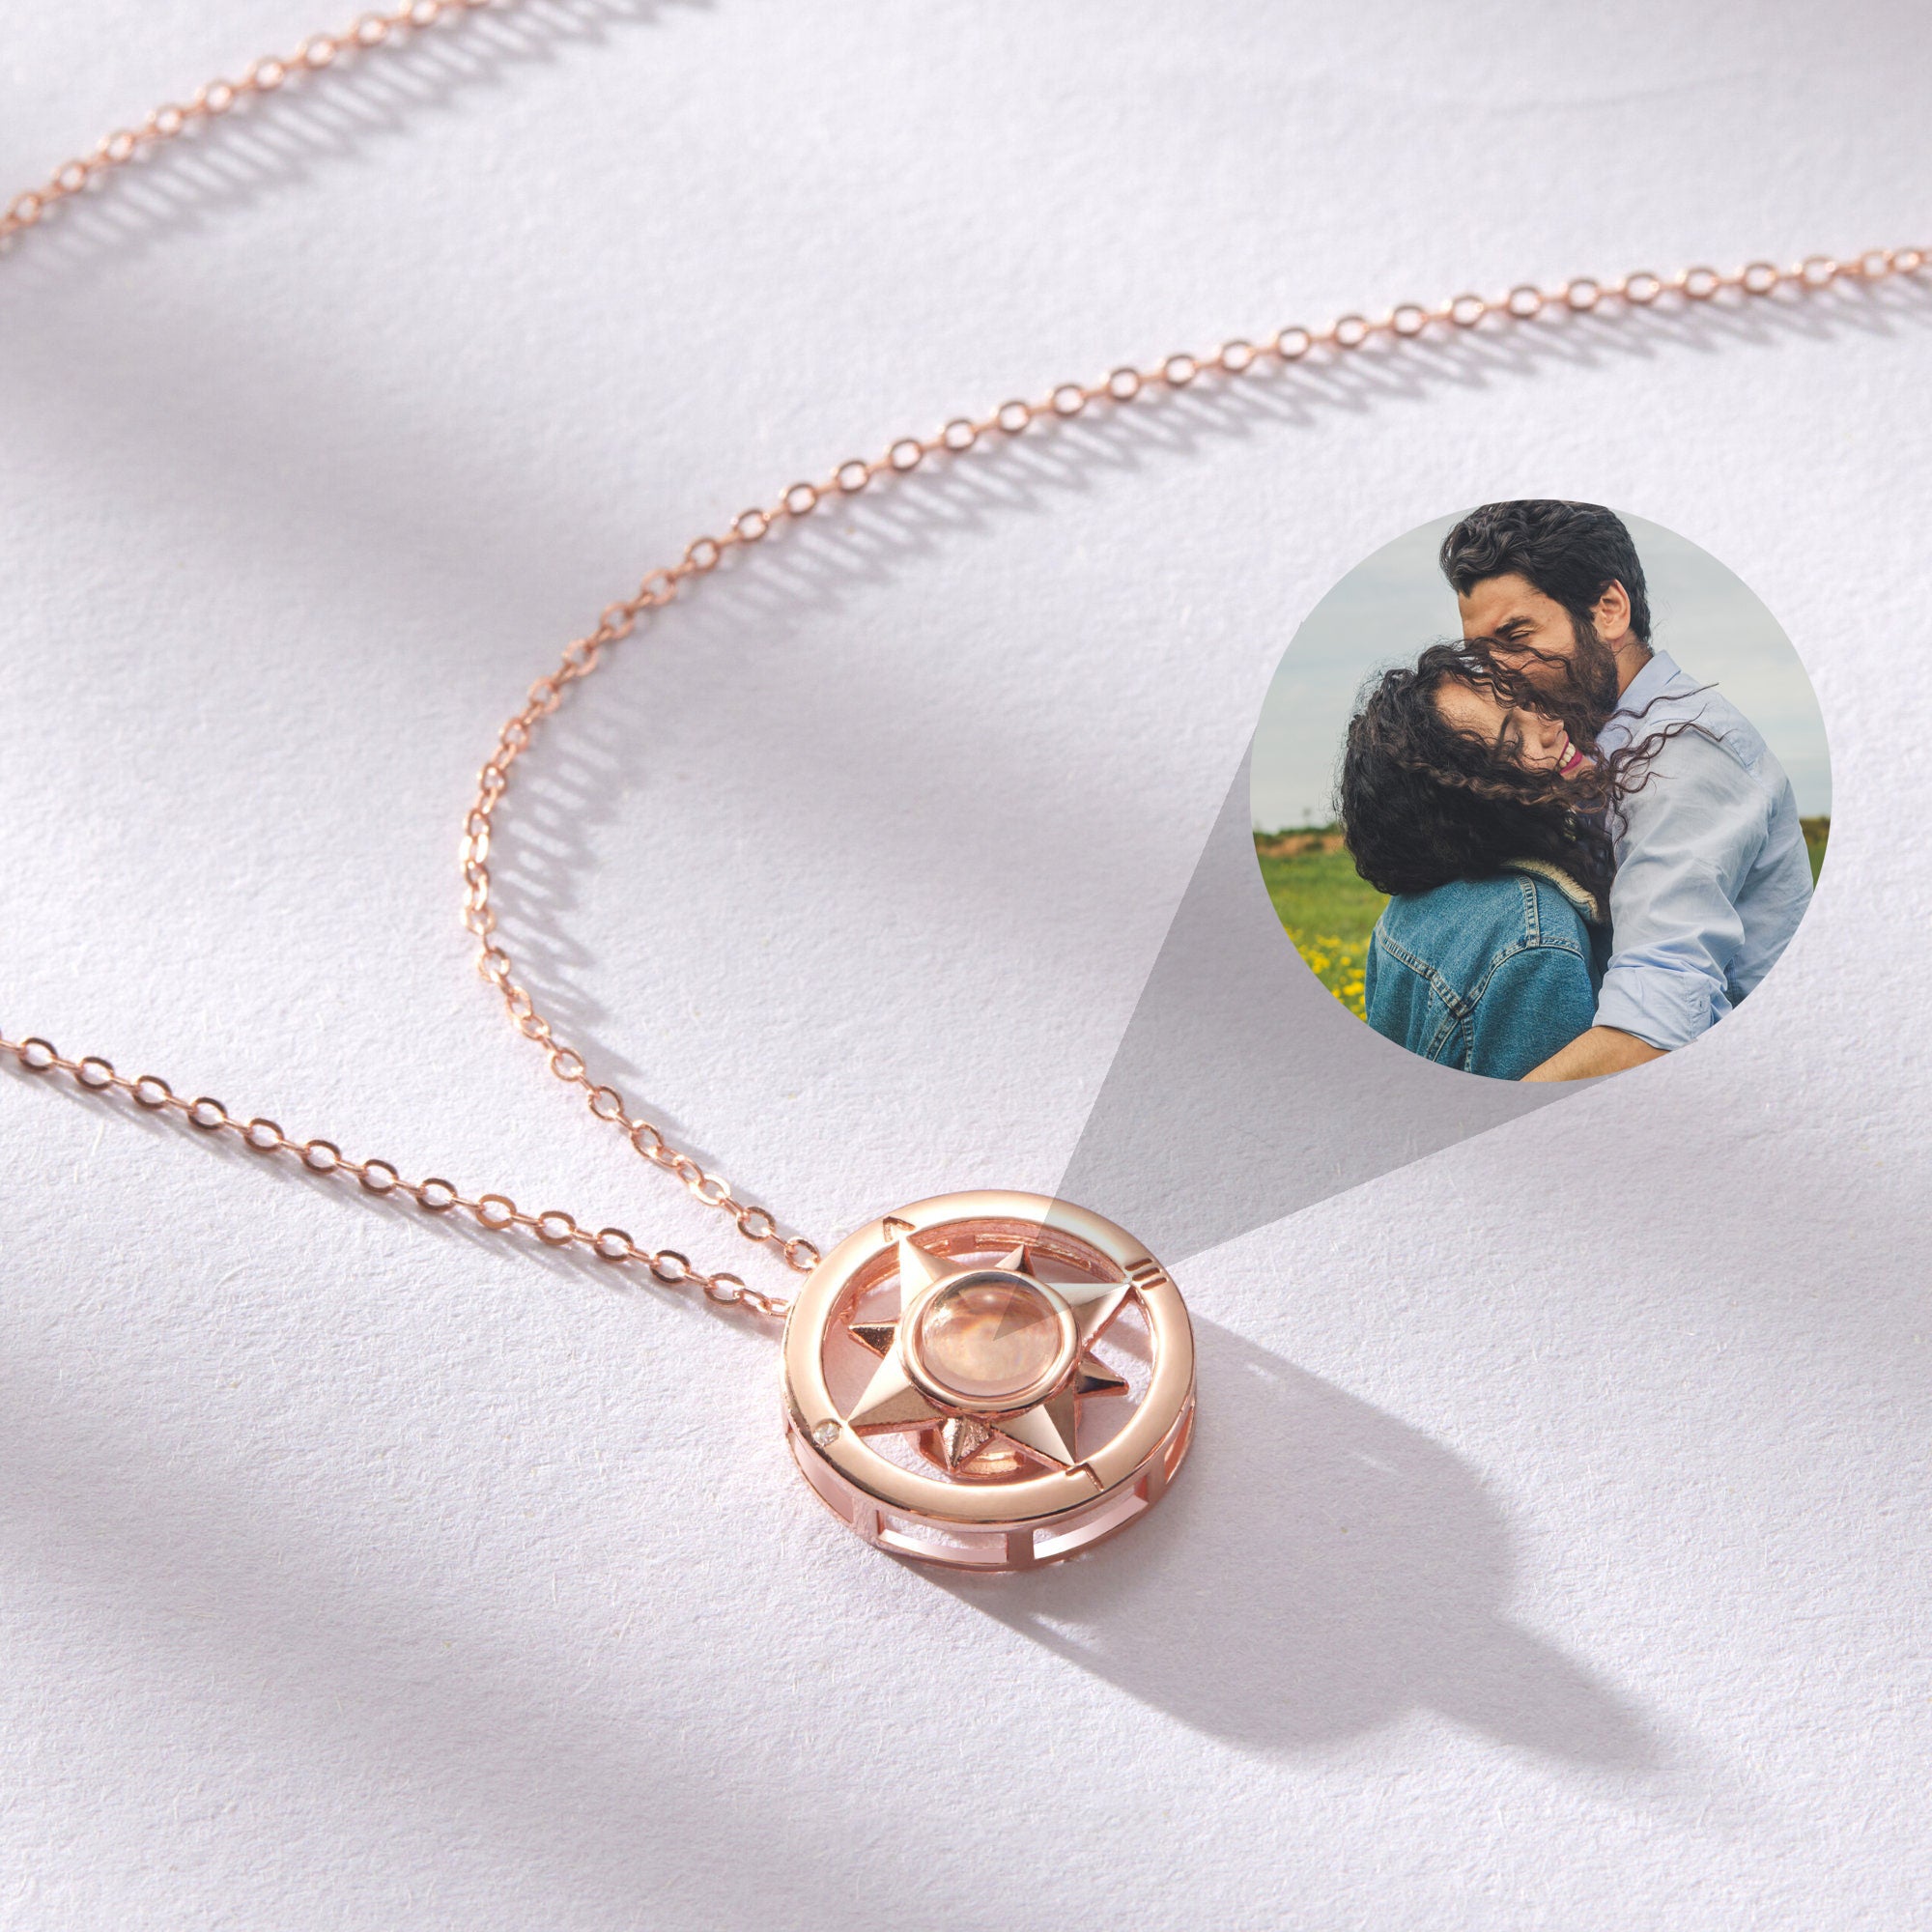 Personalized Photo Heart Projection Necklace – My Charm Necklace